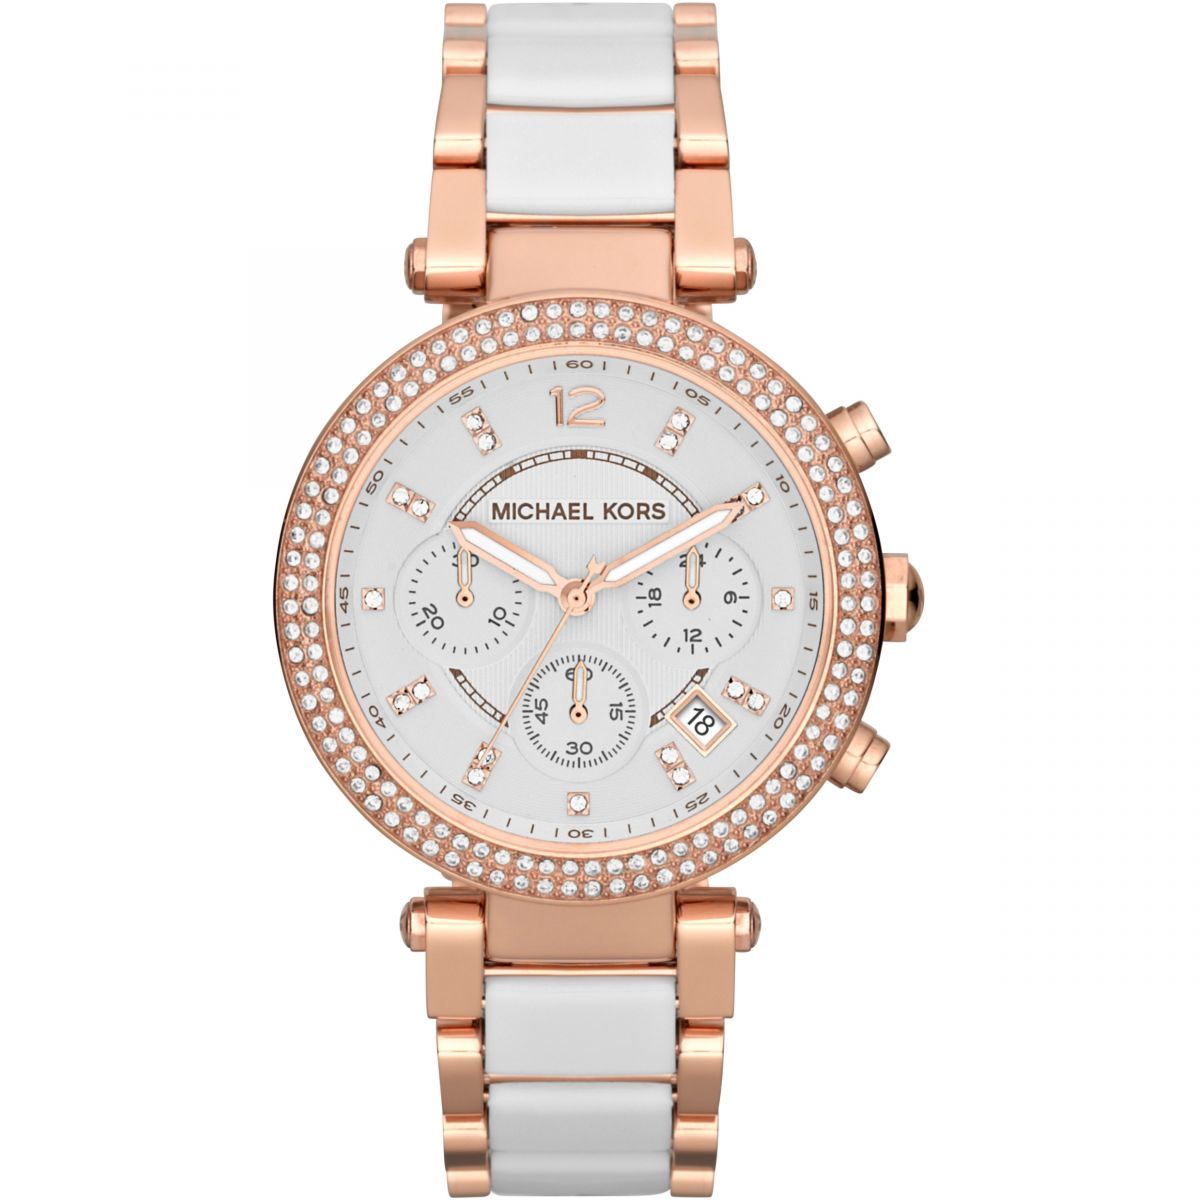 Michael Kors 38mm Rose and White Parker Chronograph Watch MK5774 - Watches & Crystals